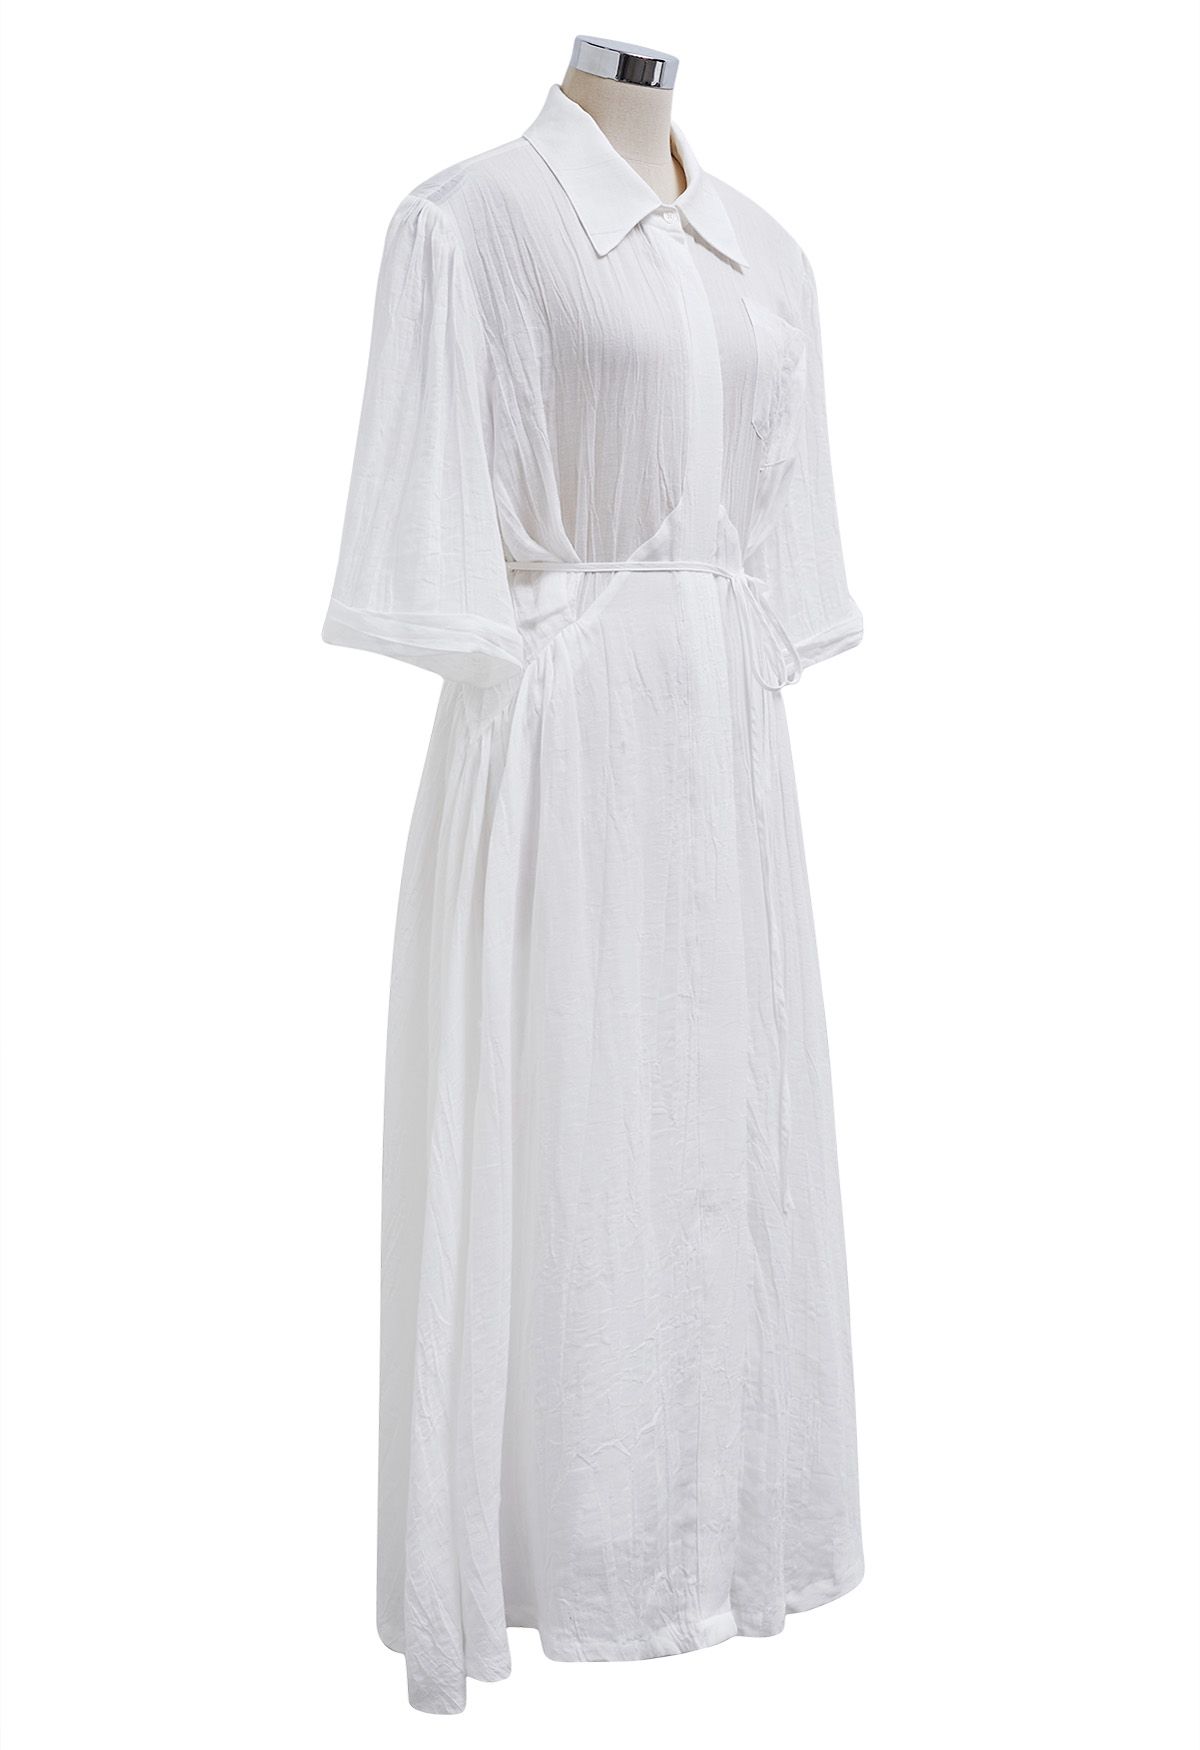 Elbow Sleeve Tie-Waist Buttoned Shirt Dress in White